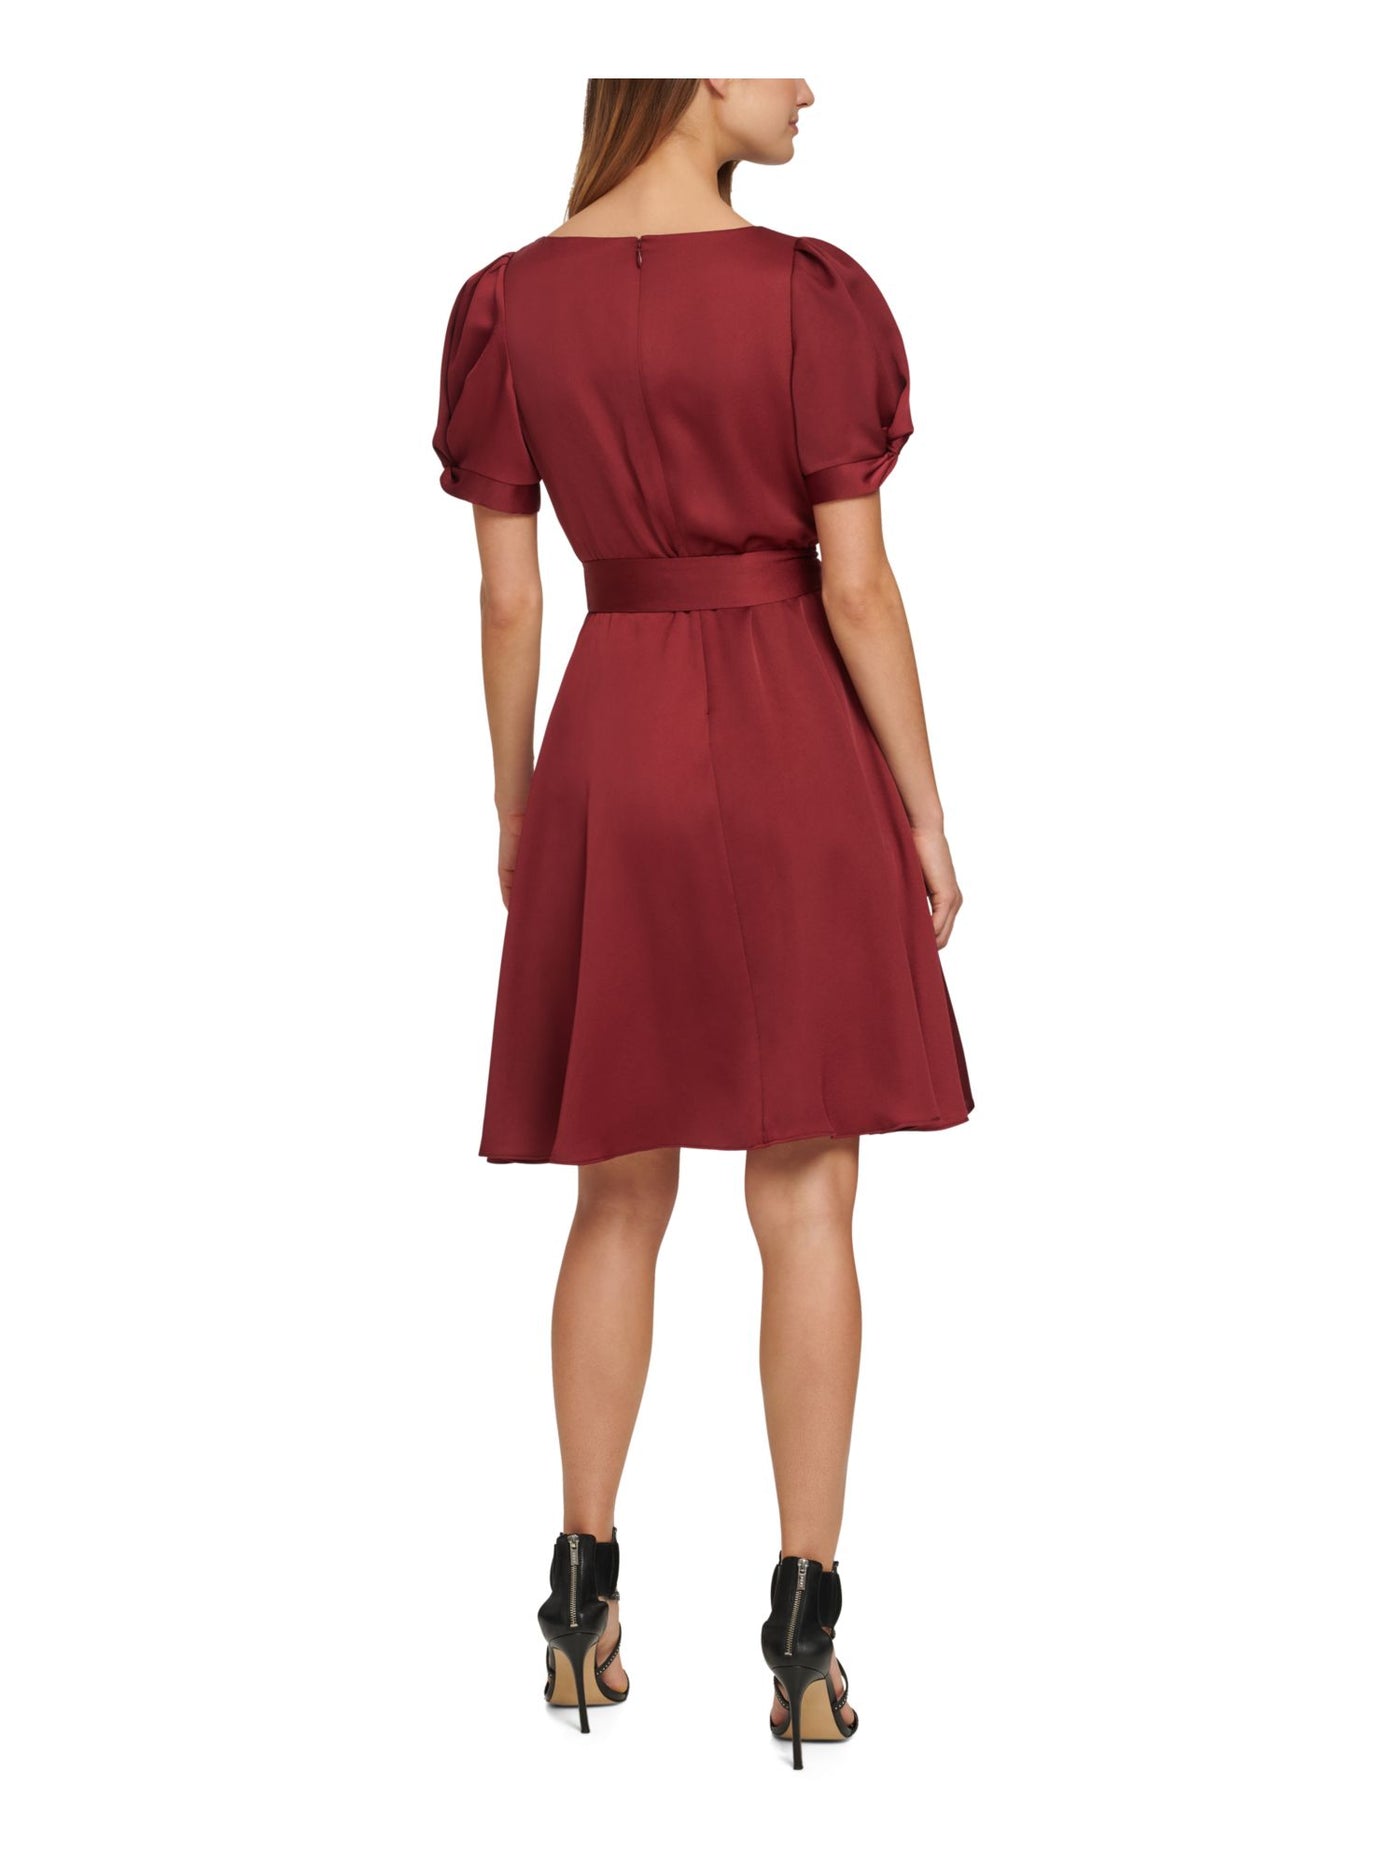 DKNY Womens Maroon Belted Zippered Pouf Sleeve Surplice Neckline Above The Knee Evening Fit + Flare Dress 4